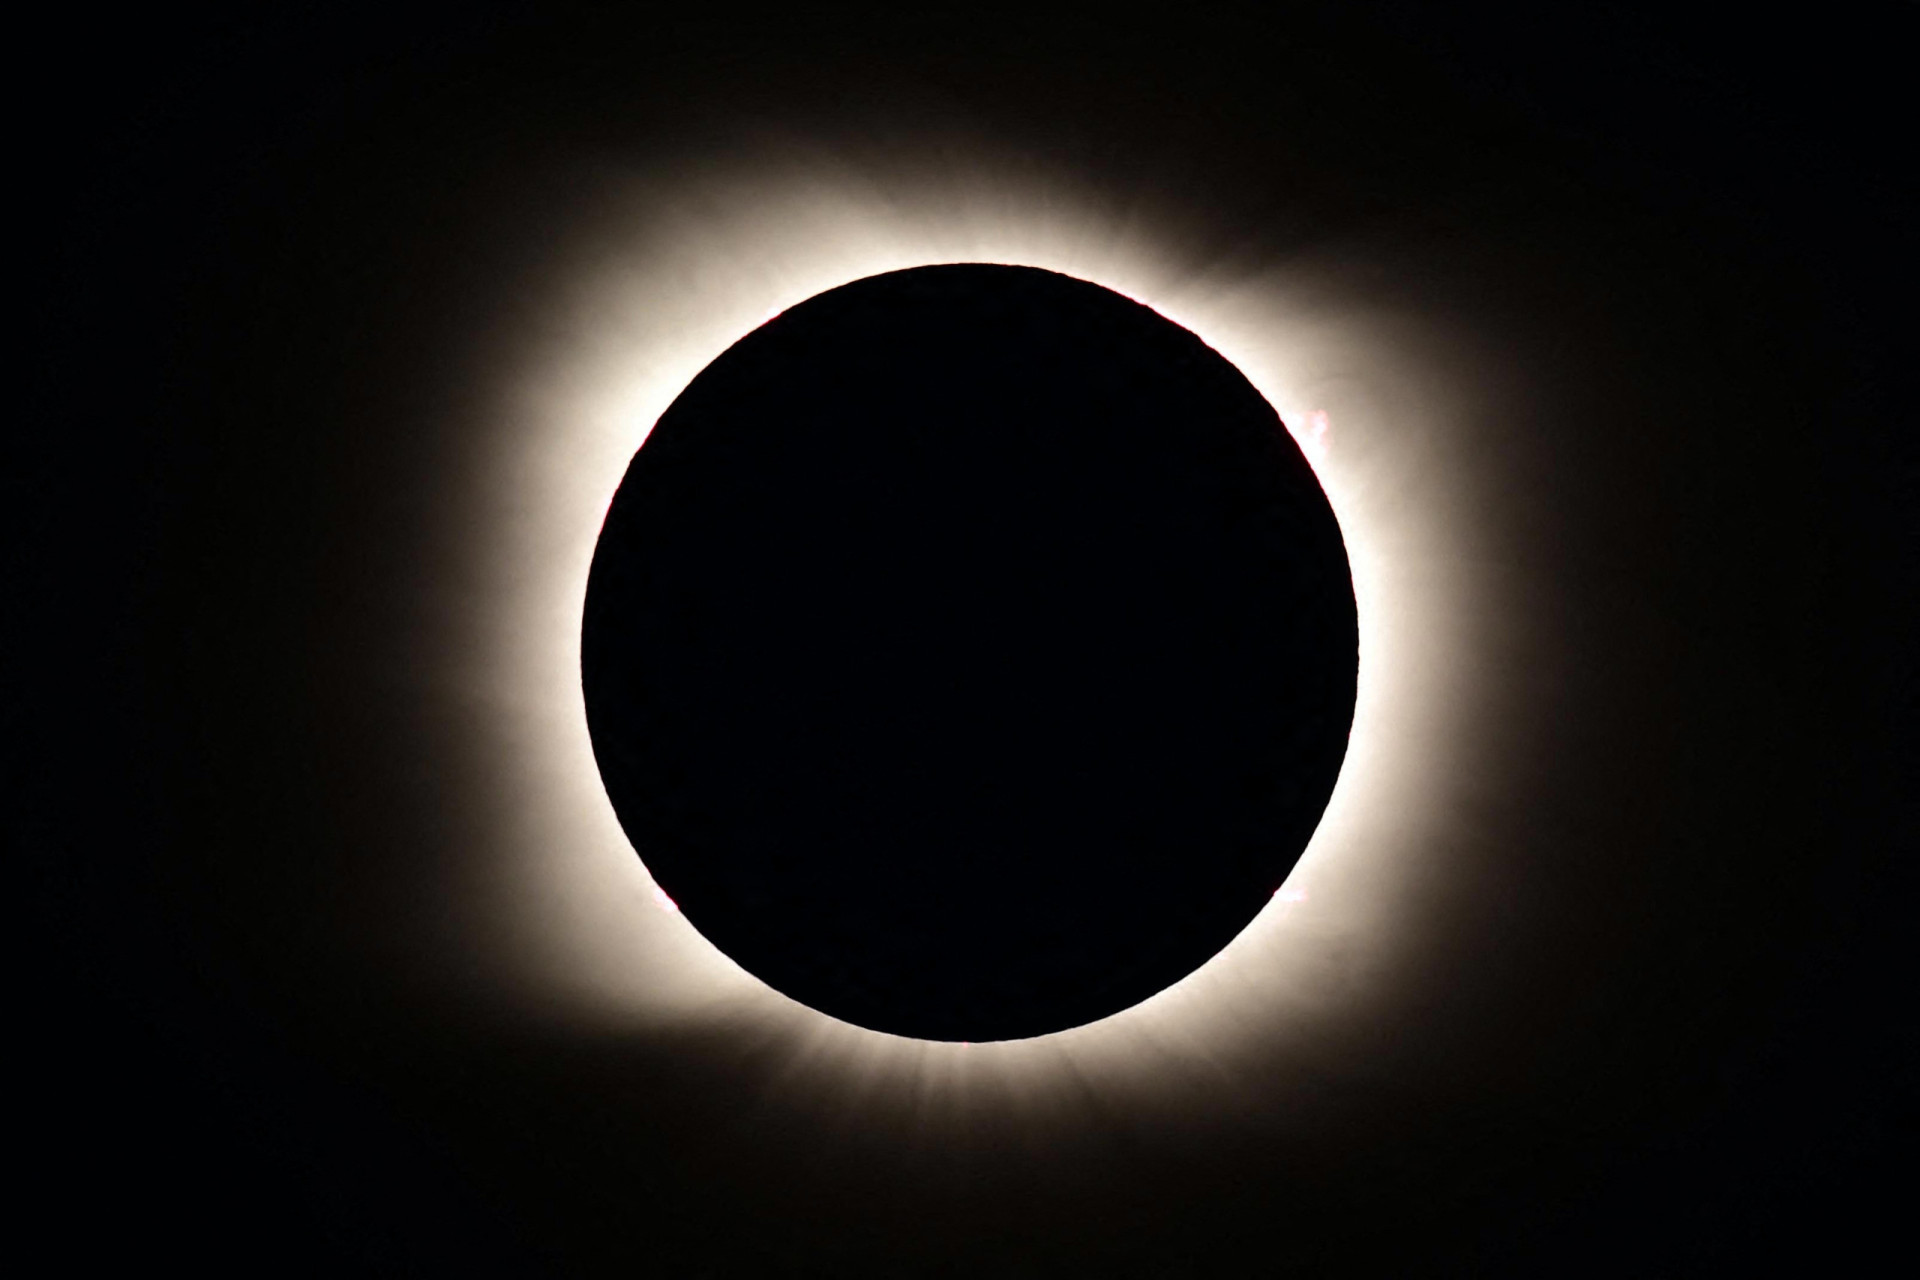 <p>The eagerly anticipated total solar eclipse set to wow parts of Mexico and North America on April 8 brings with it not only a once-in-a-lifetime event for many, but an opportunity for scientists to further our understanding of the Earth's atmosphere. But beware! The eclipse also comes with several health warnings.</p><p><a href="https://www.msn.com/en-ca/community/channel/vid-7xx8mnucu55yw63we9va2gwr7uihbxwc68fxqp25x6tg4ftibpra?cvid=94631541bc0f4f89bfd59158d696ad7e">Follow us and access great exclusive content every day</a></p>